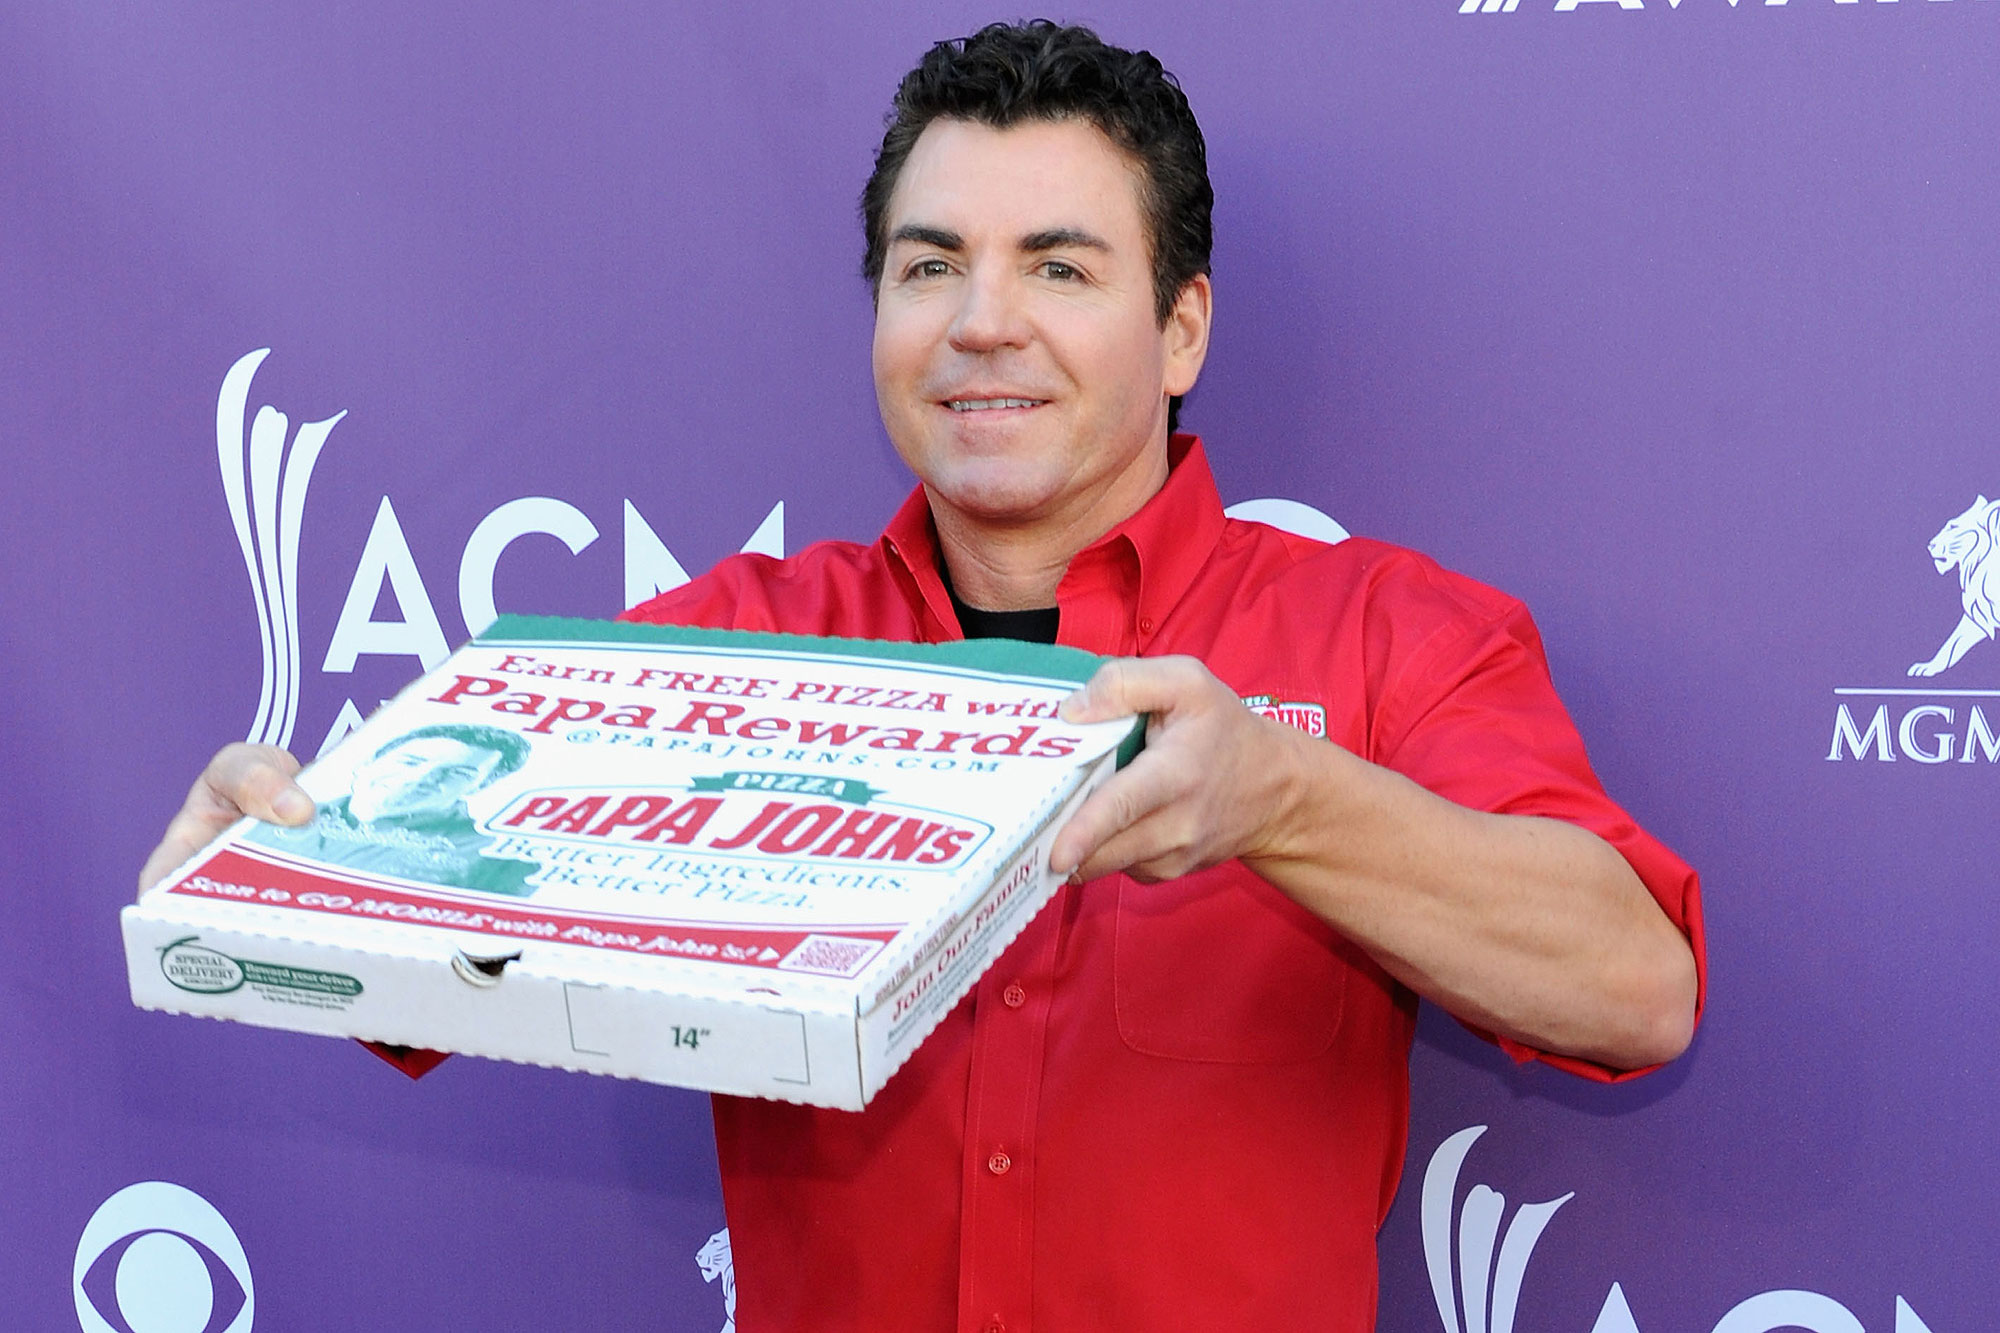 Papa John’s to Remove It’s Founder’s Image from Marketing Materials After Racial Slur